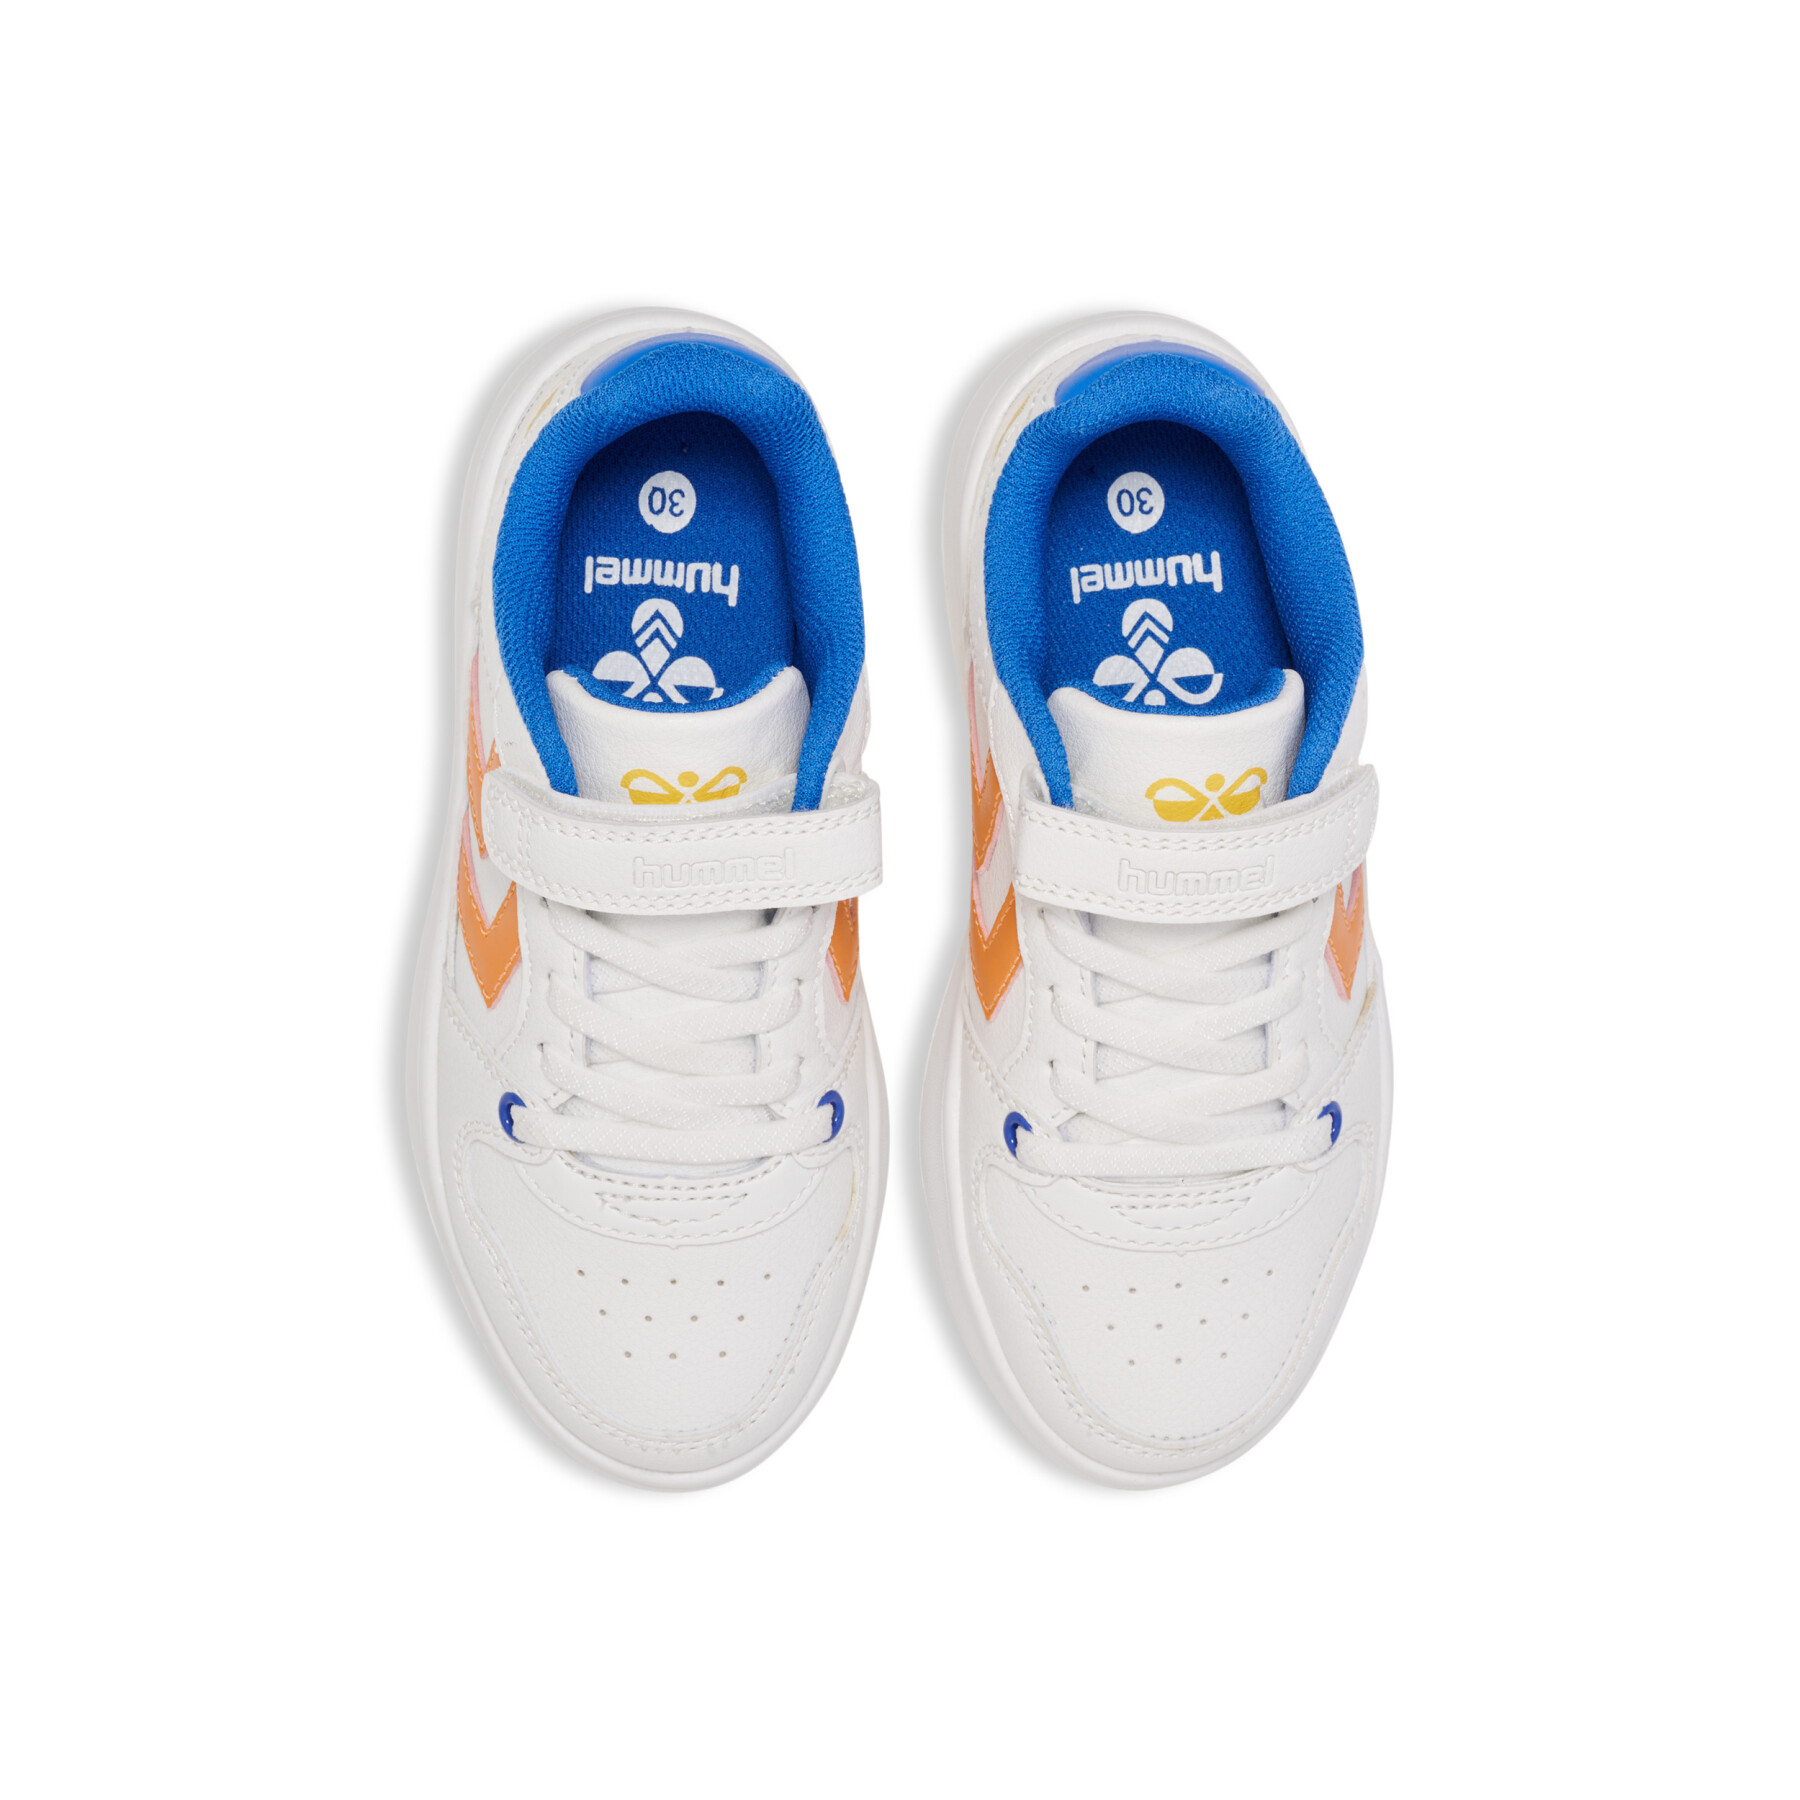 Baby sneakers Hummel ST. Power lay